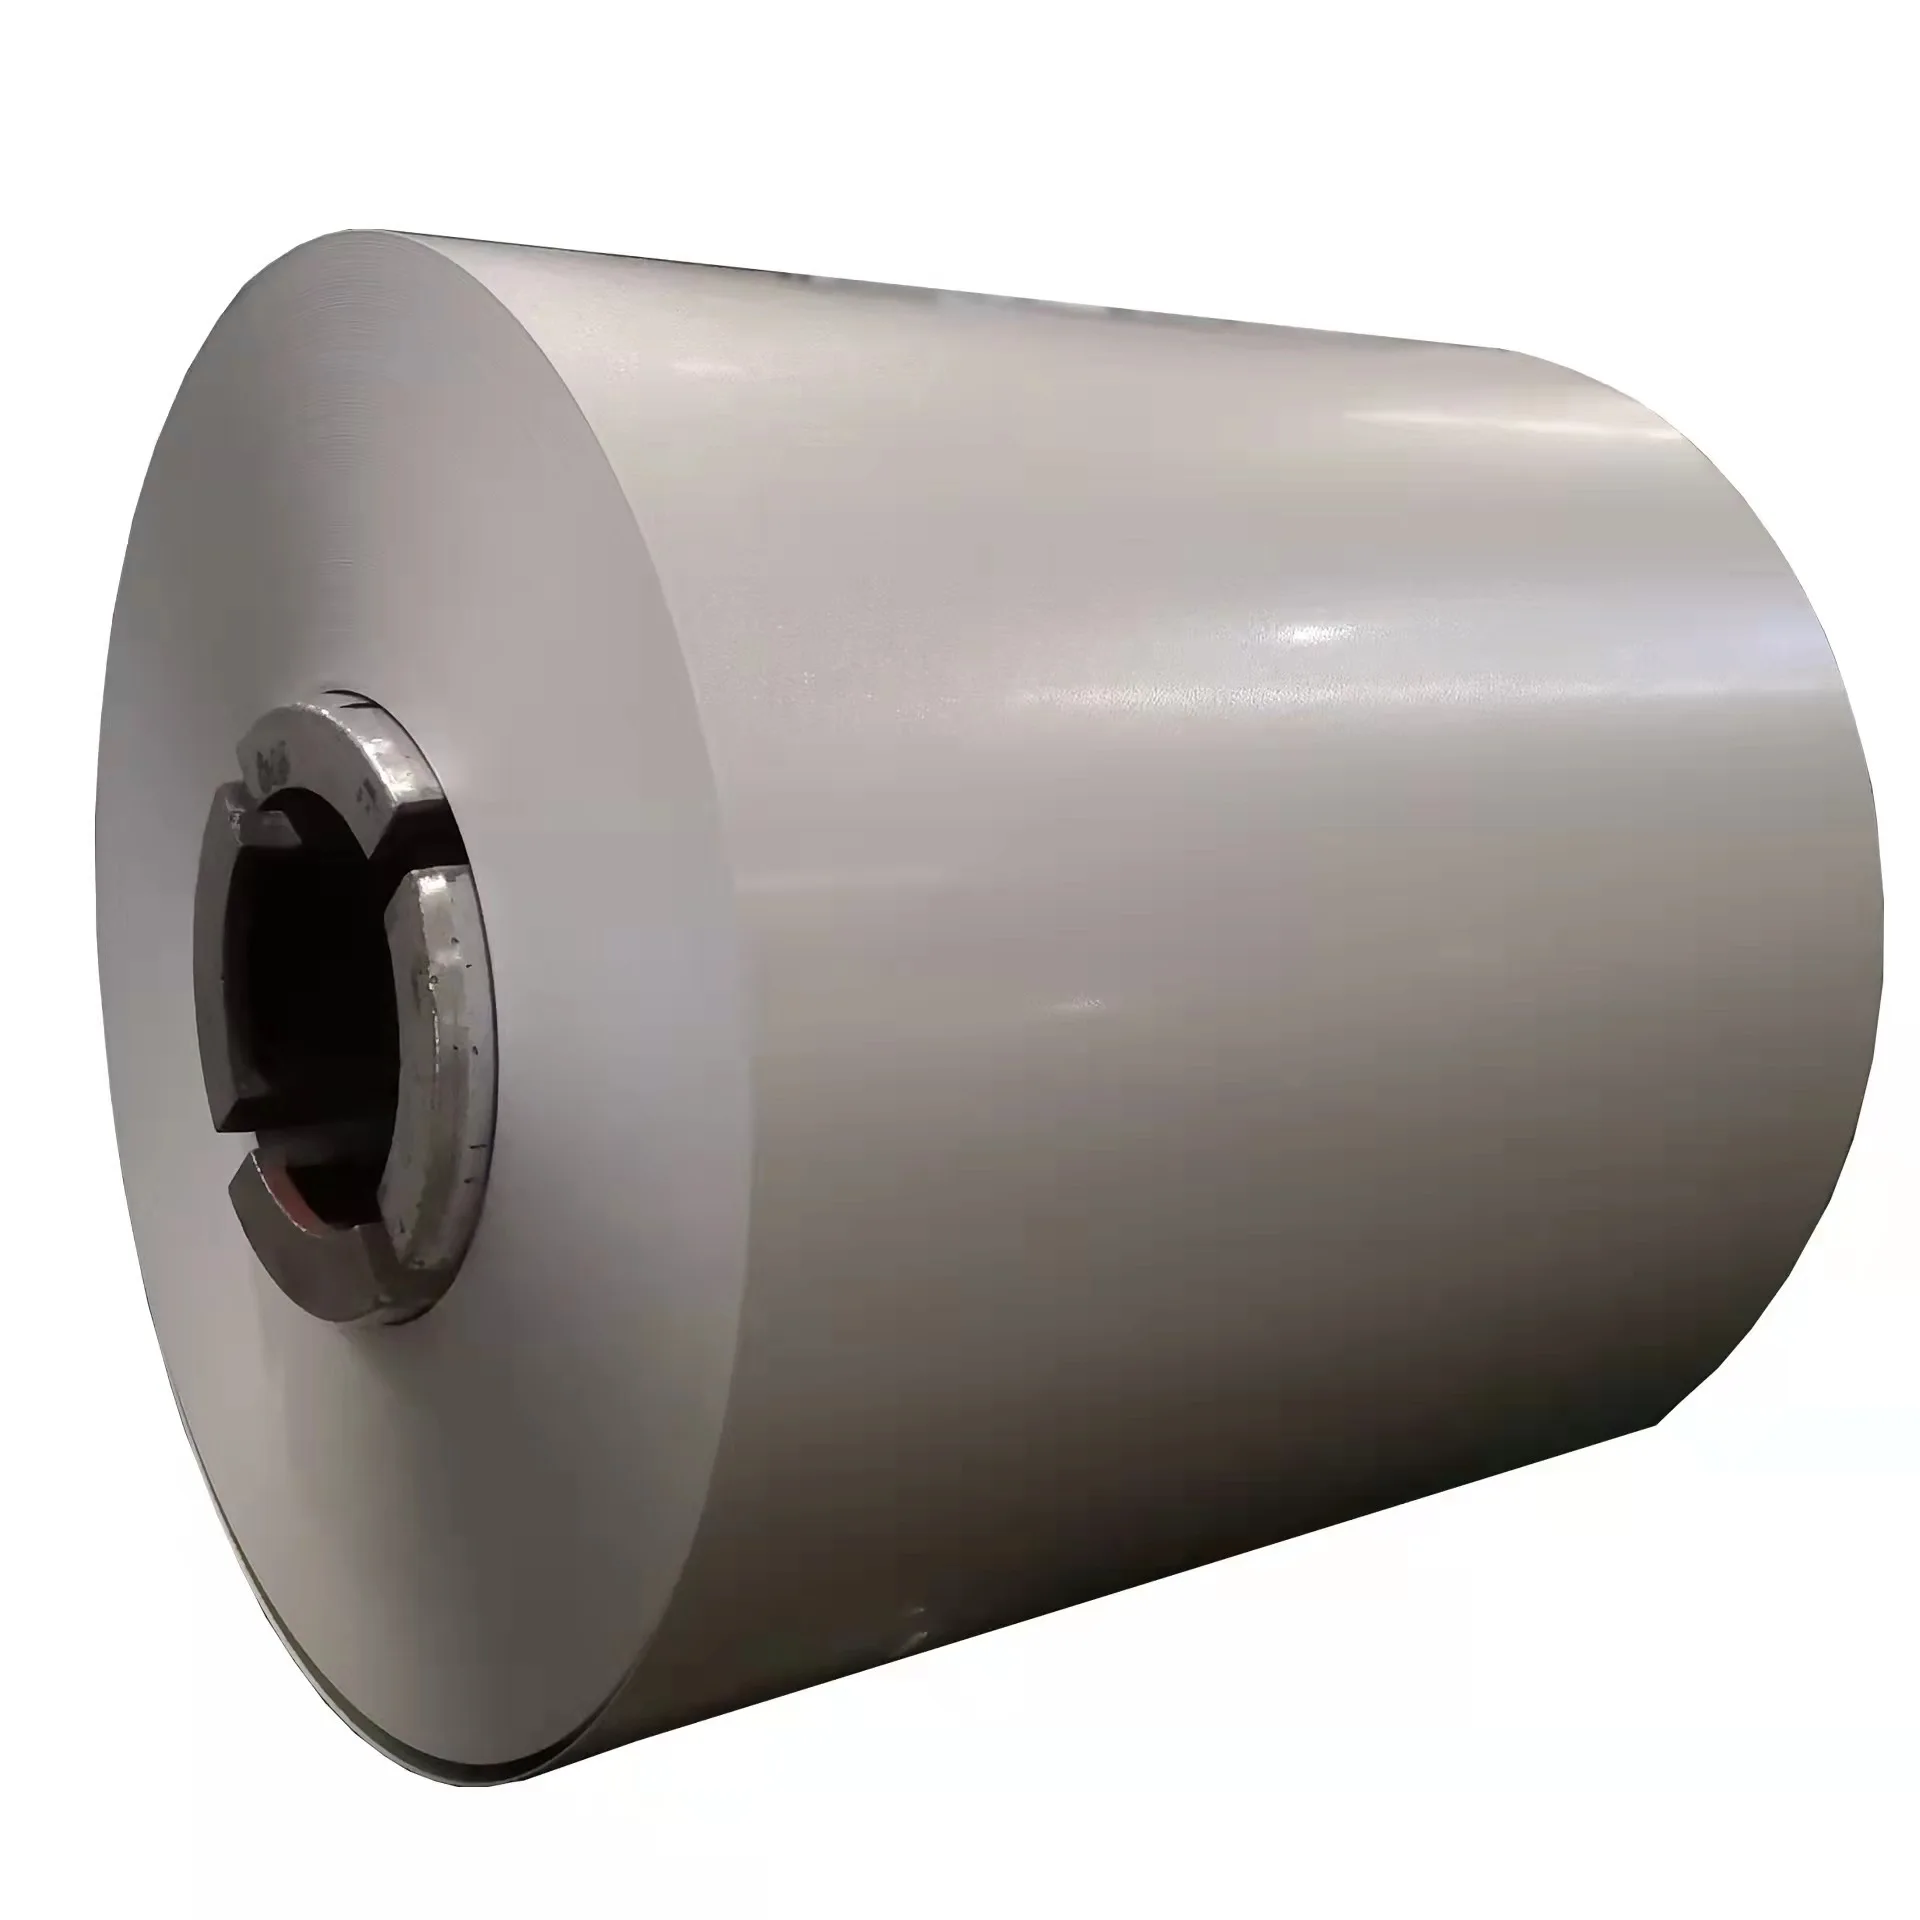 tinplate per roll wholesale tin price tin plate sheet for food cans